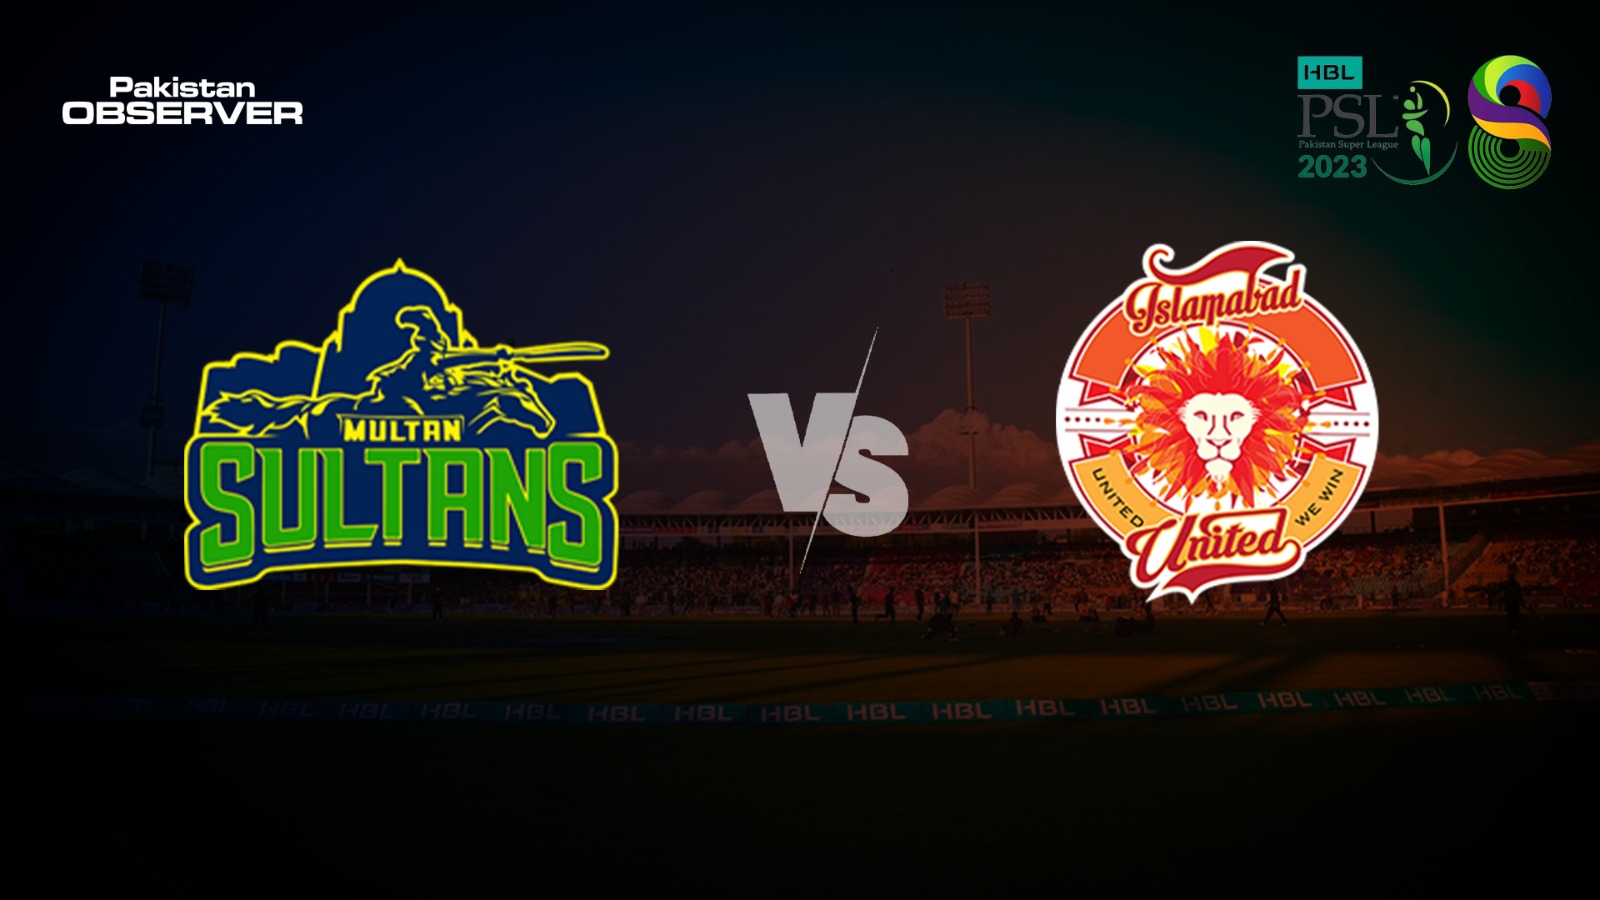 PSL 8 match no7 Multan Sultans vs Islamabad United all you need to know